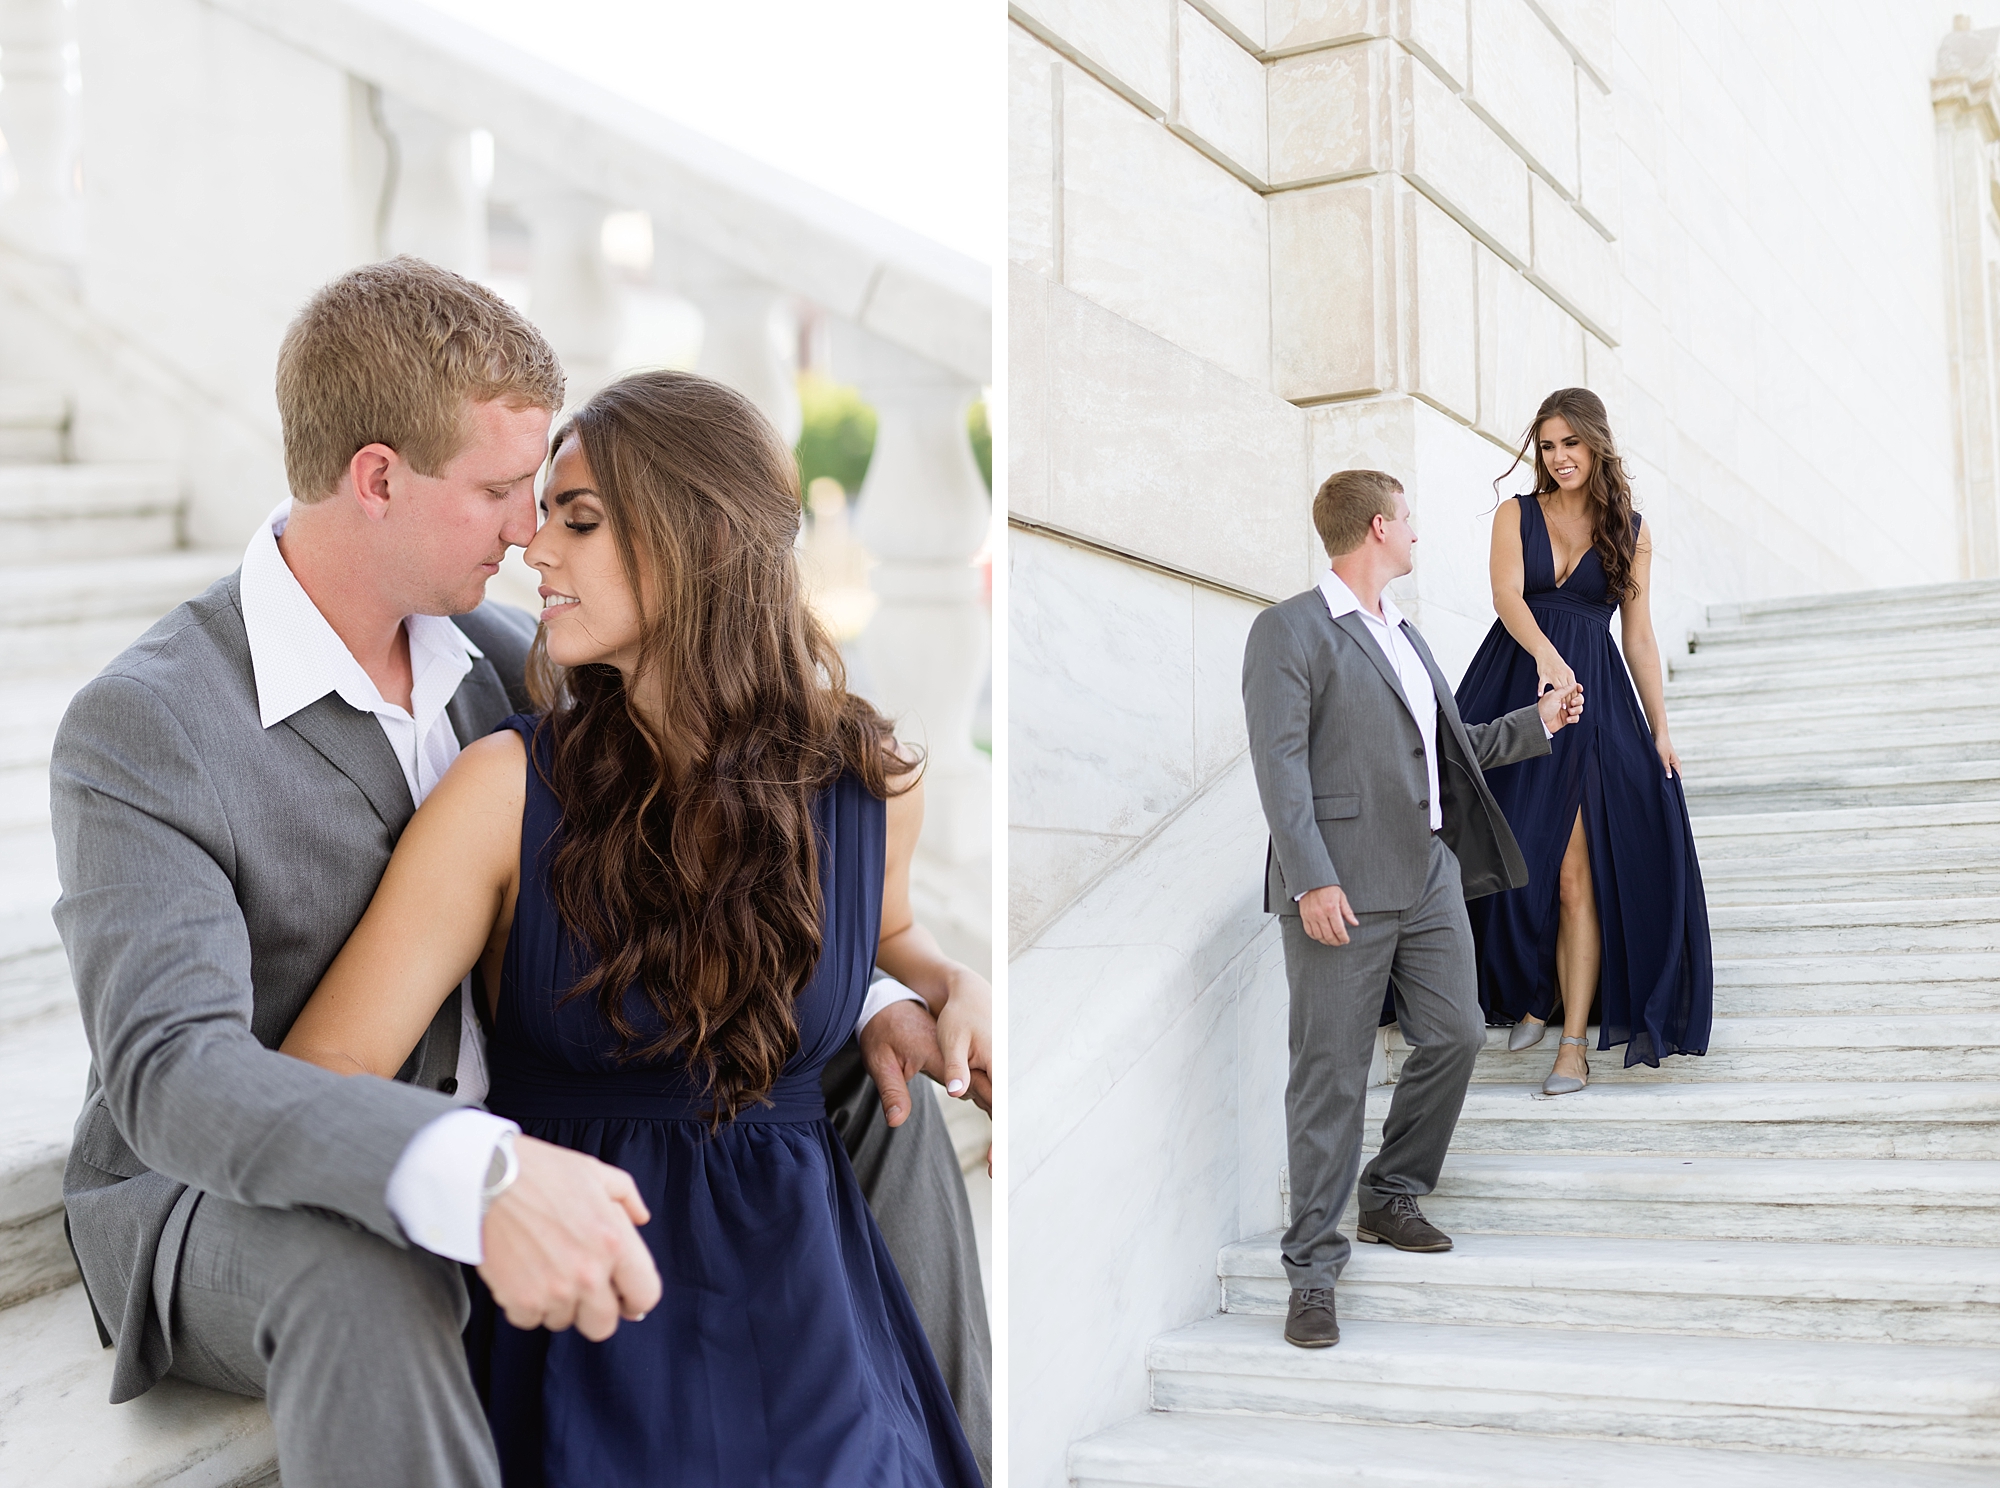 An elegant late summer engagement session at the DIA, Detroit Public Library, and Belle Isle Park in Downtown Detroit, Michigan by Breanne Rochelle Photography.